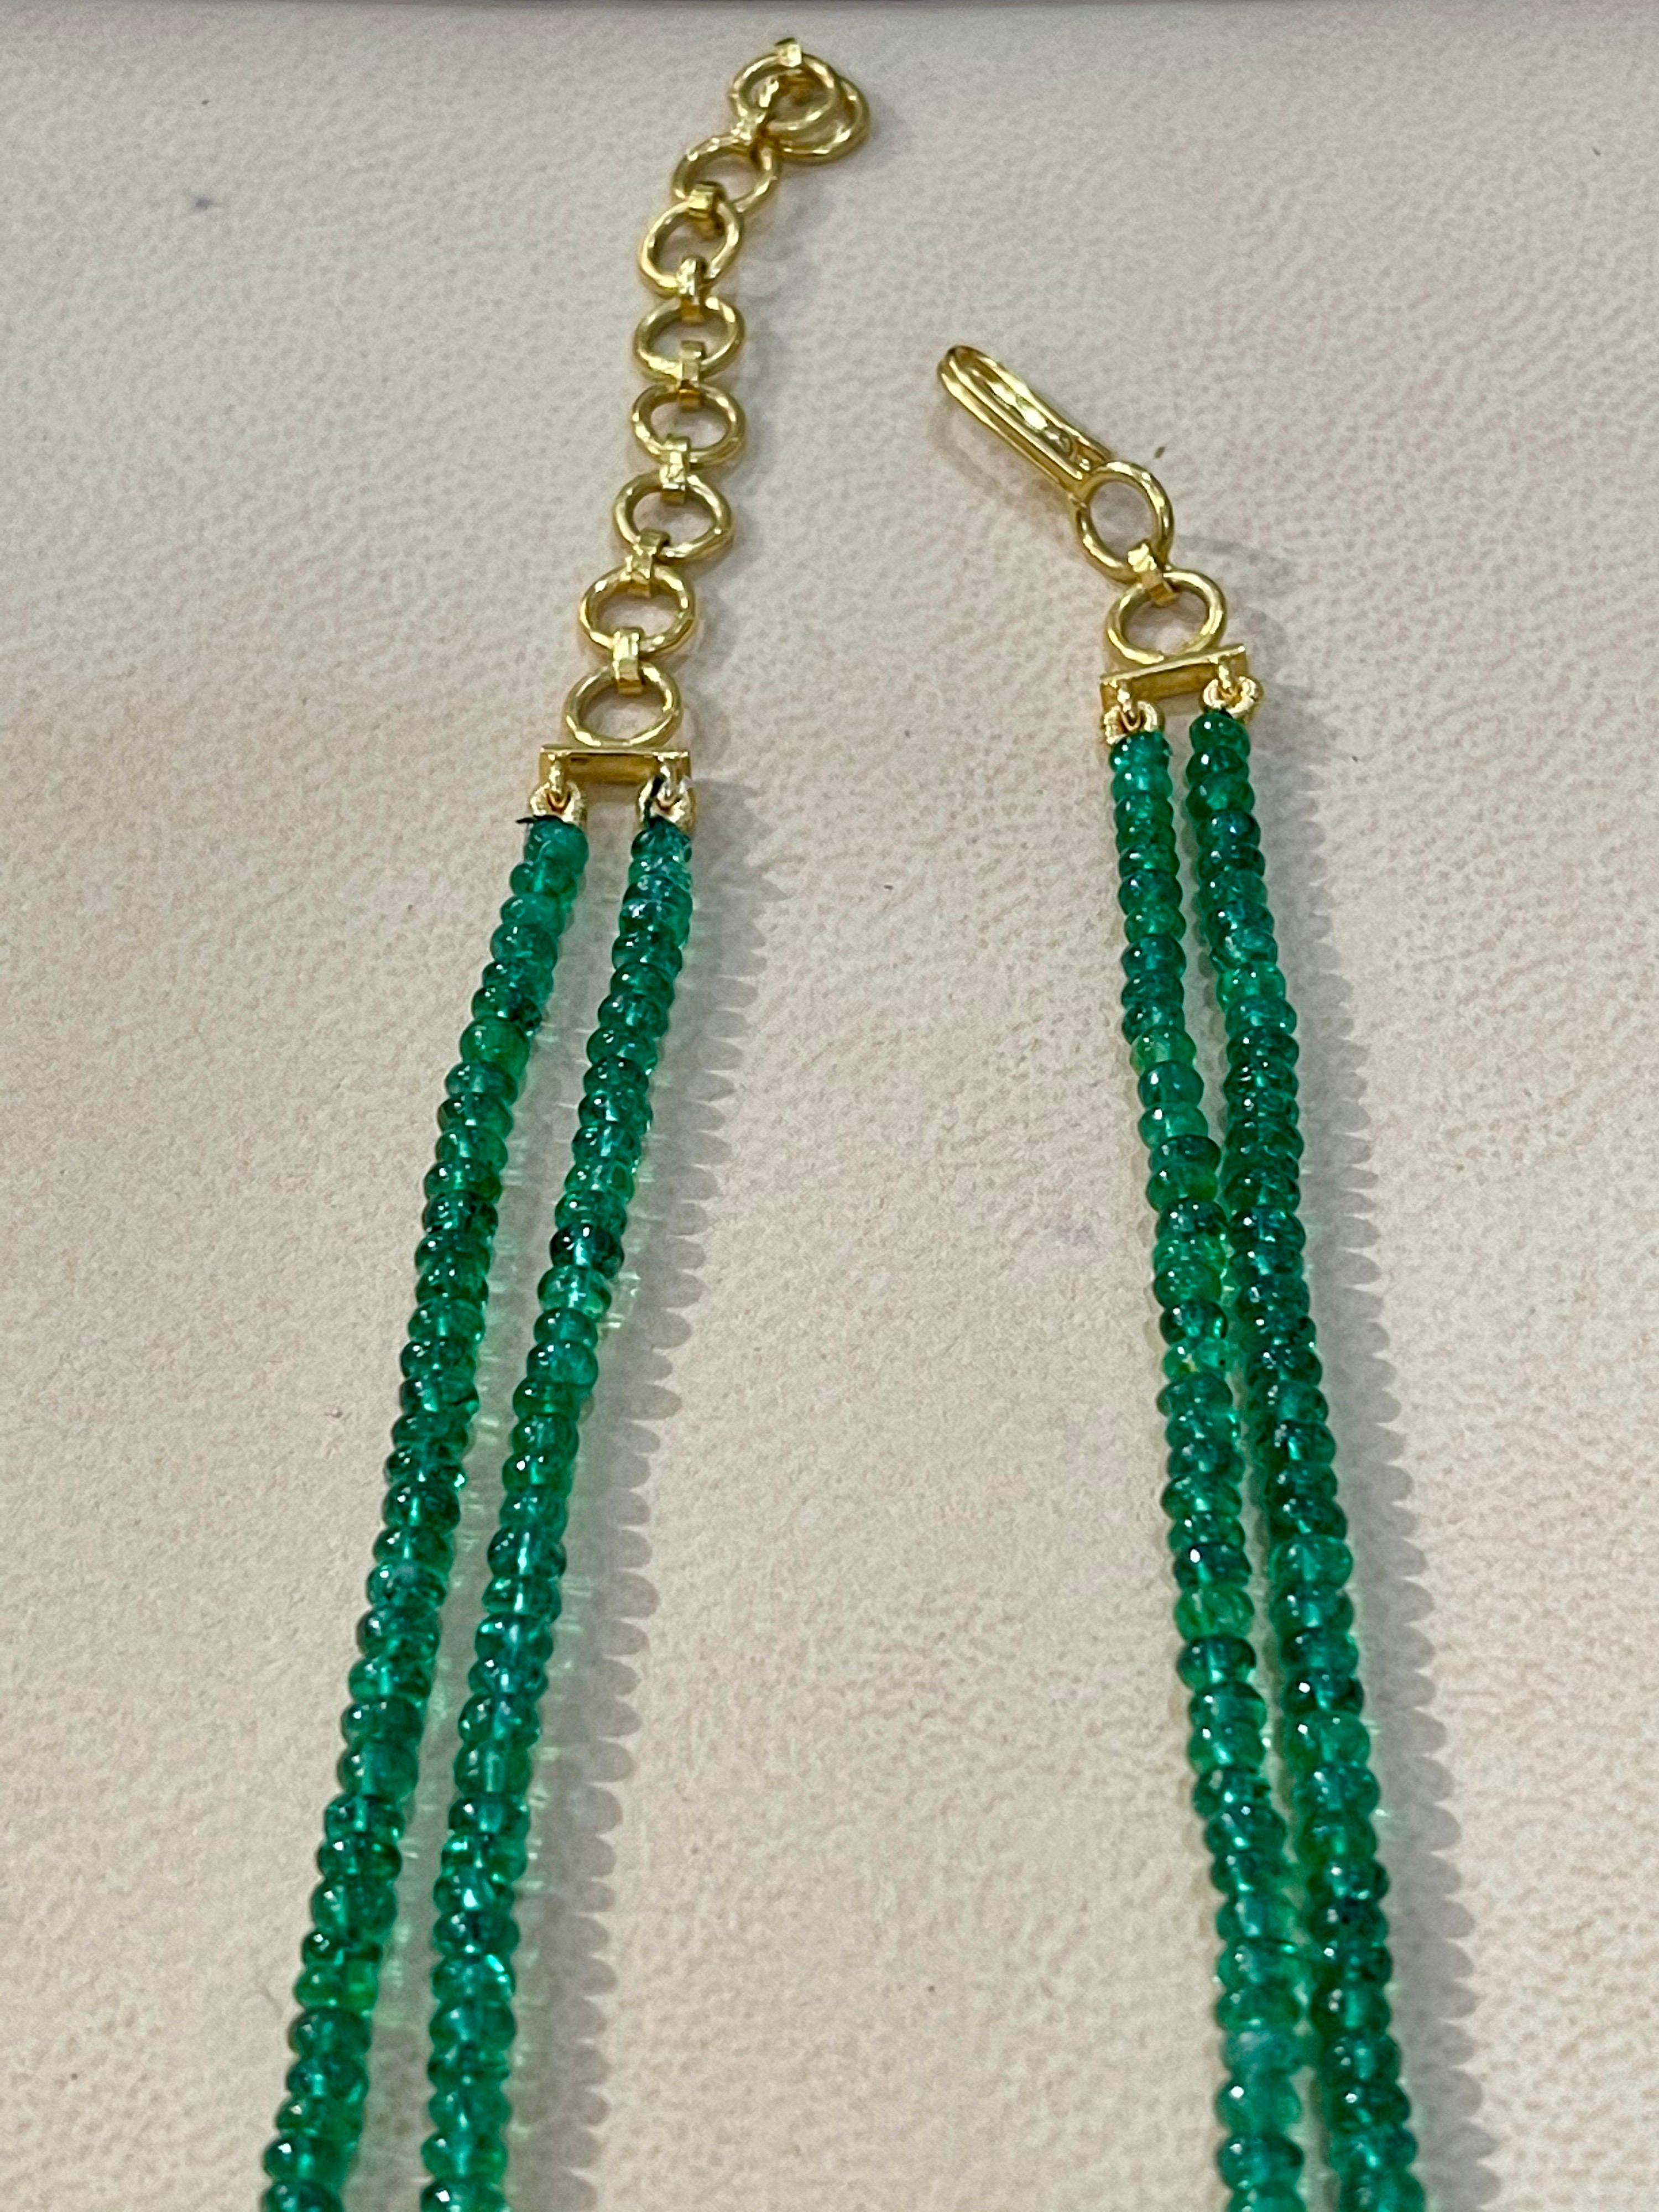 125ct Fine Emerald Beads 2 Line Necklace with 14 Kt Yellow Gold Clasp Adjustable 1